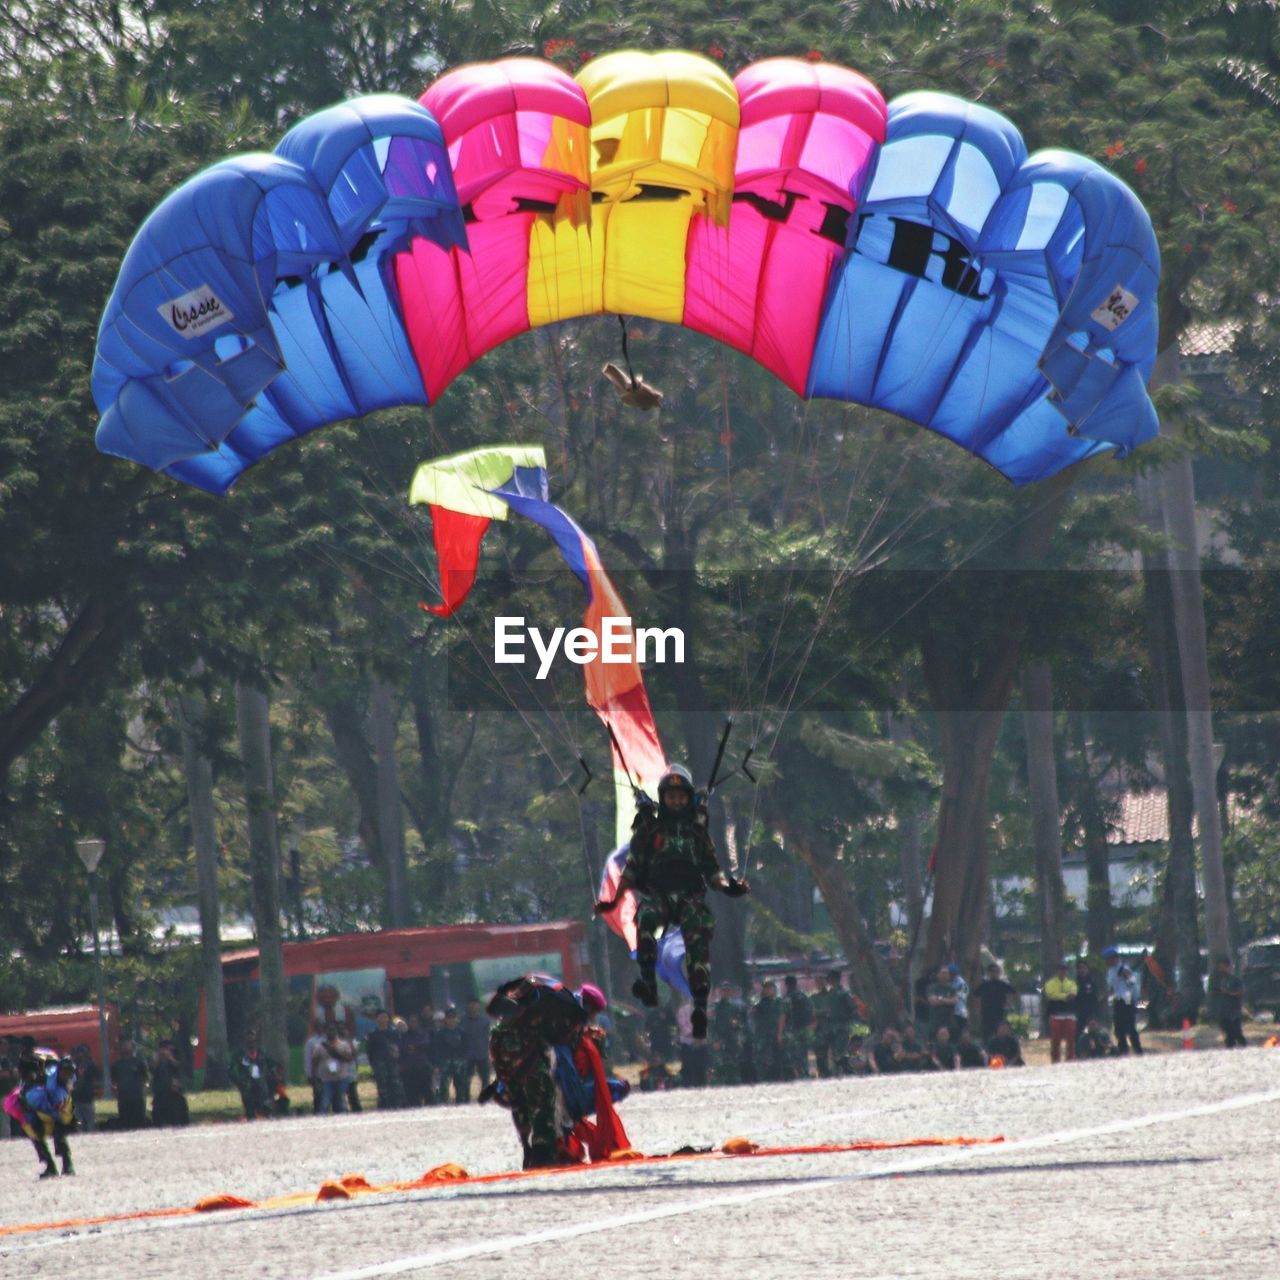 sports, extreme sports, windsports, leisure activity, nature, parachute, mid-air, adventure, flying, paragliding, day, tree, group of people, lifestyles, full length, motion, sports equipment, plant, men, parachuting, transportation, outdoors, multi colored, joy, exhilaration, fun, sky, sign, adult, recreation